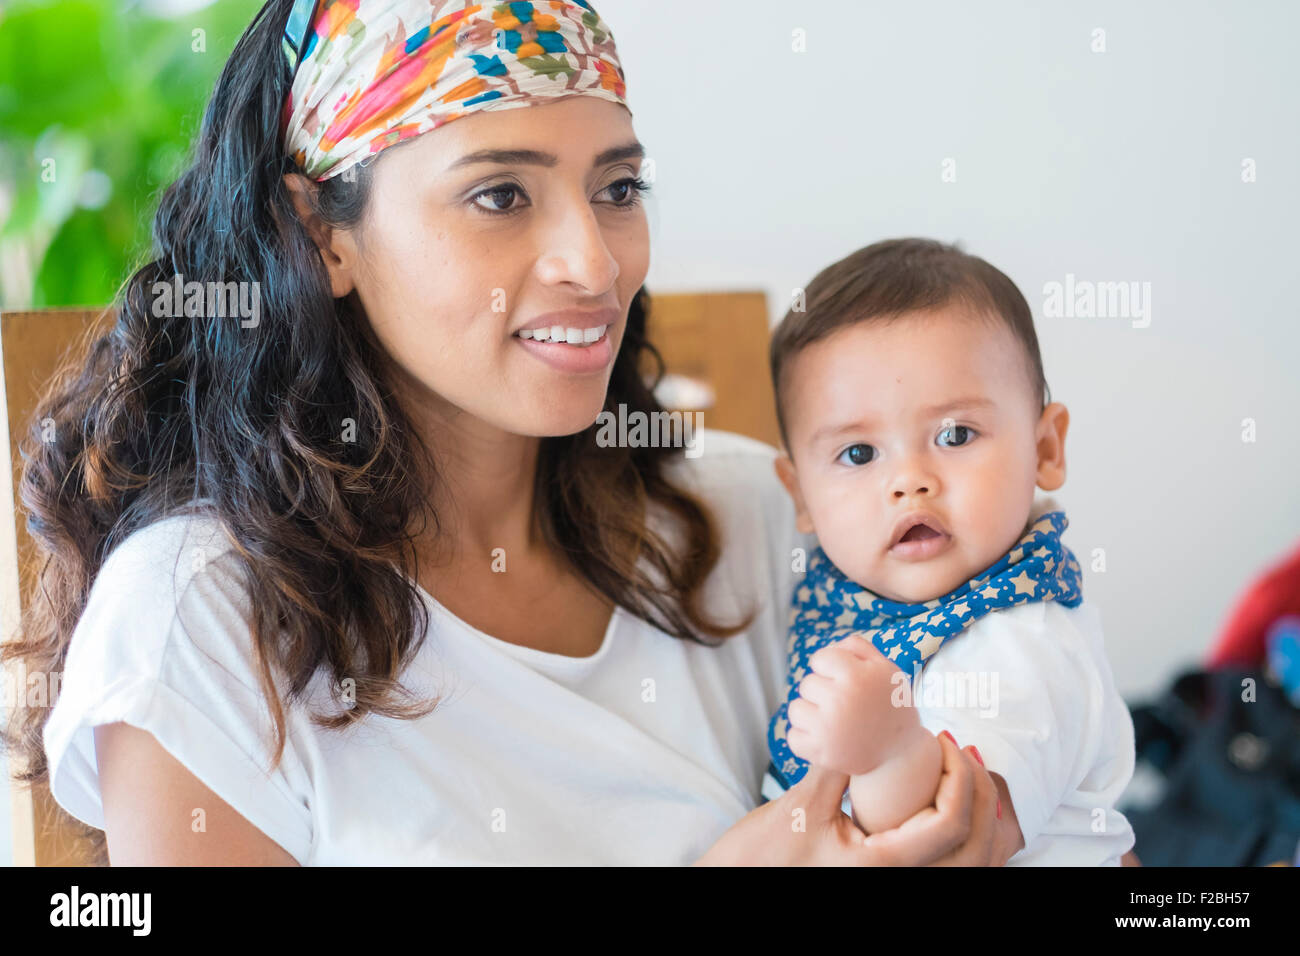 Multi ethnic family - hispanic woman with baby son on her lap Stock Photo